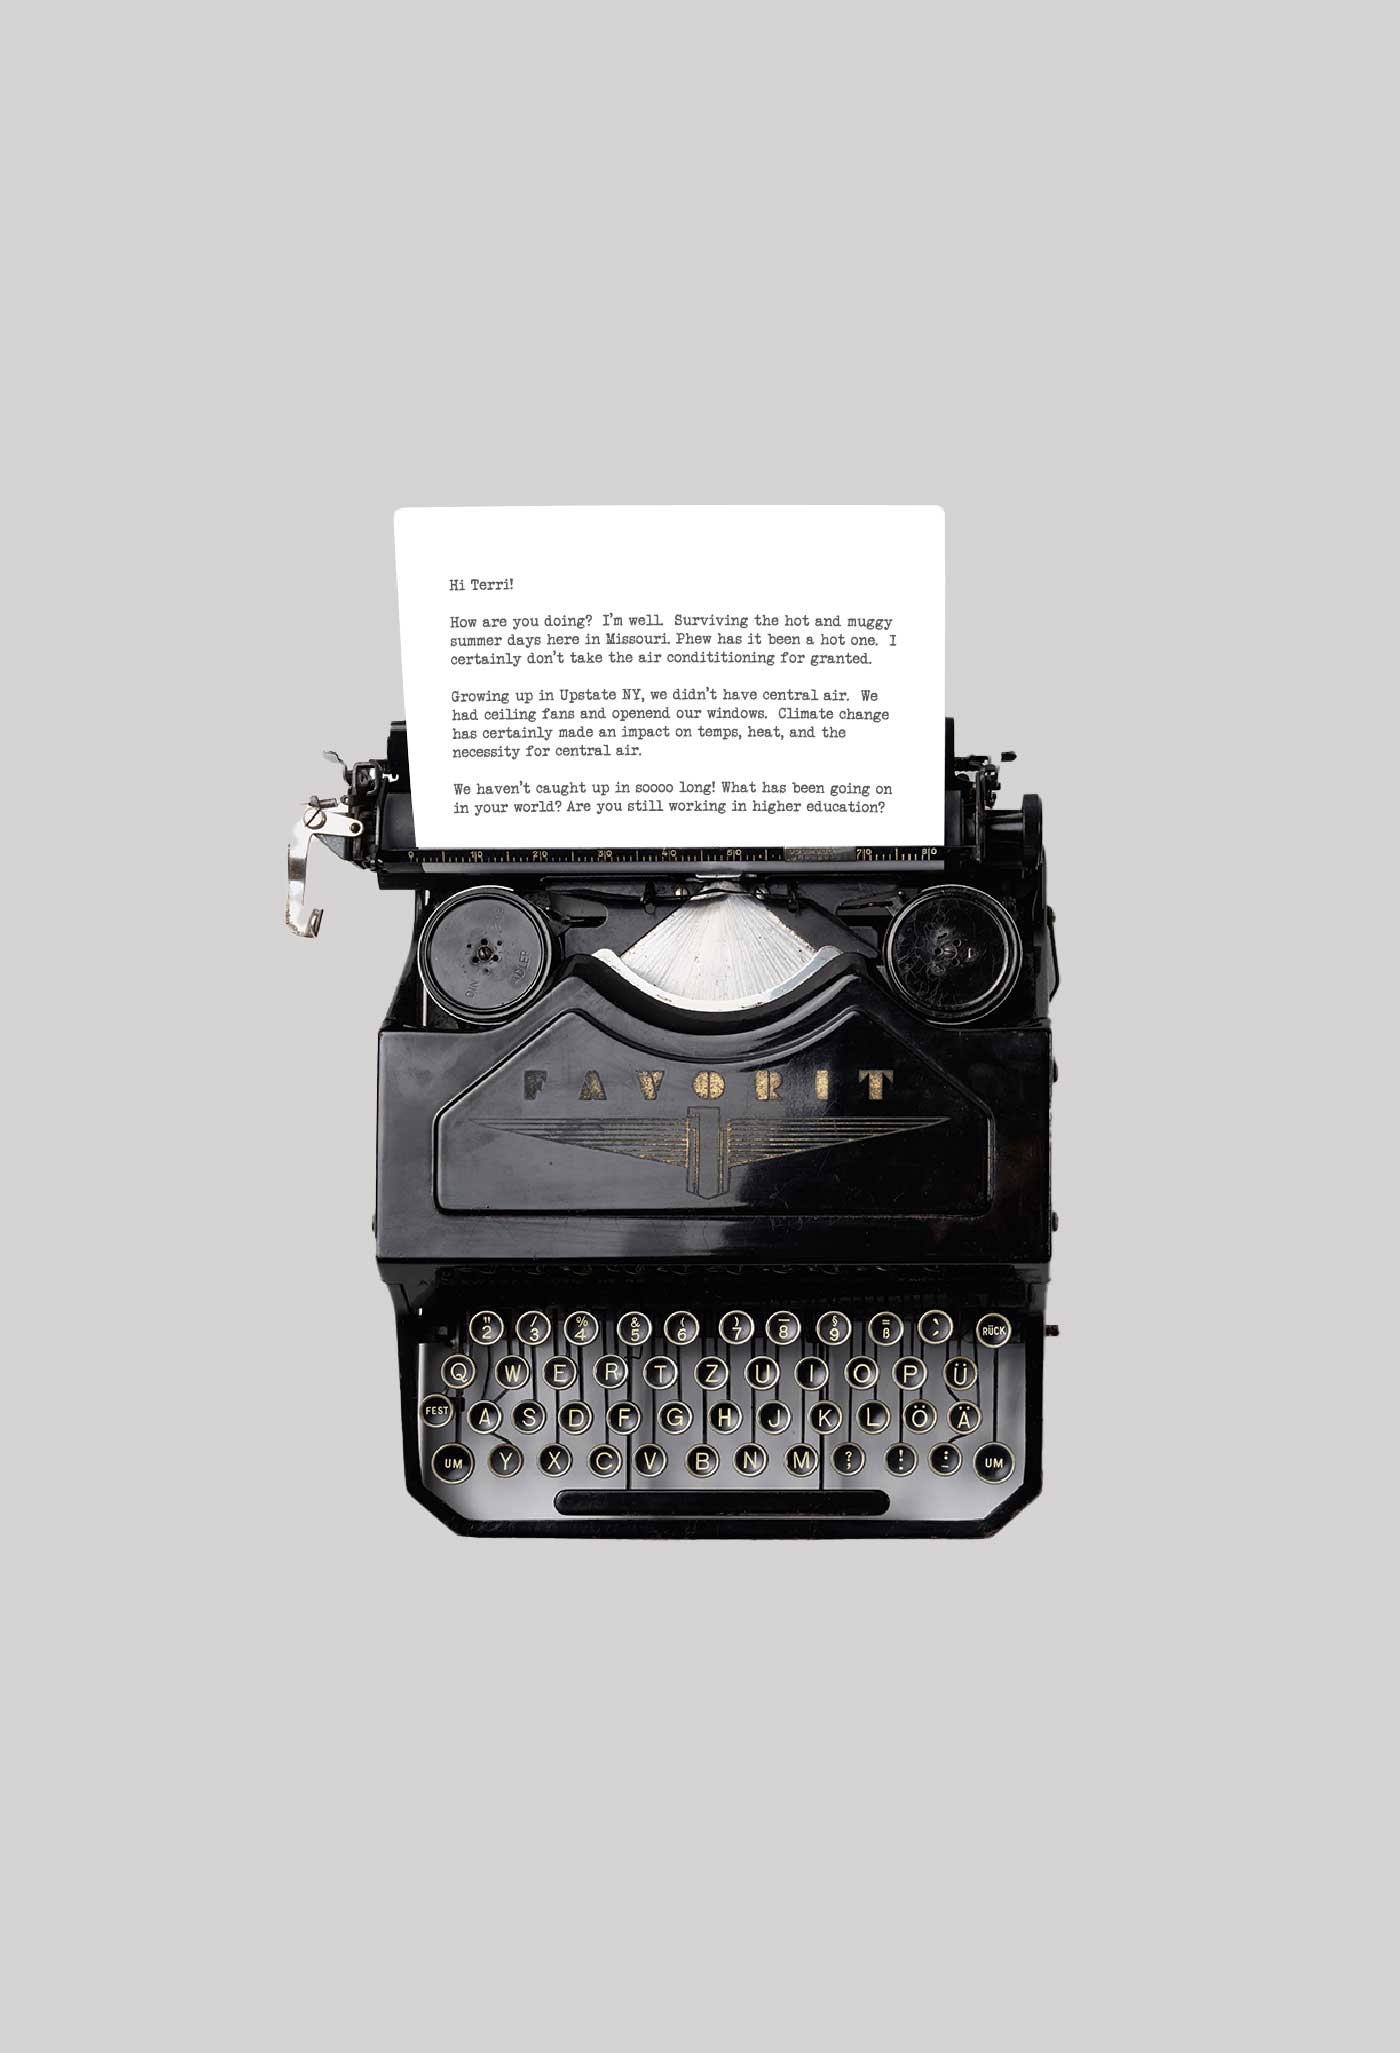 Typewriter with letter